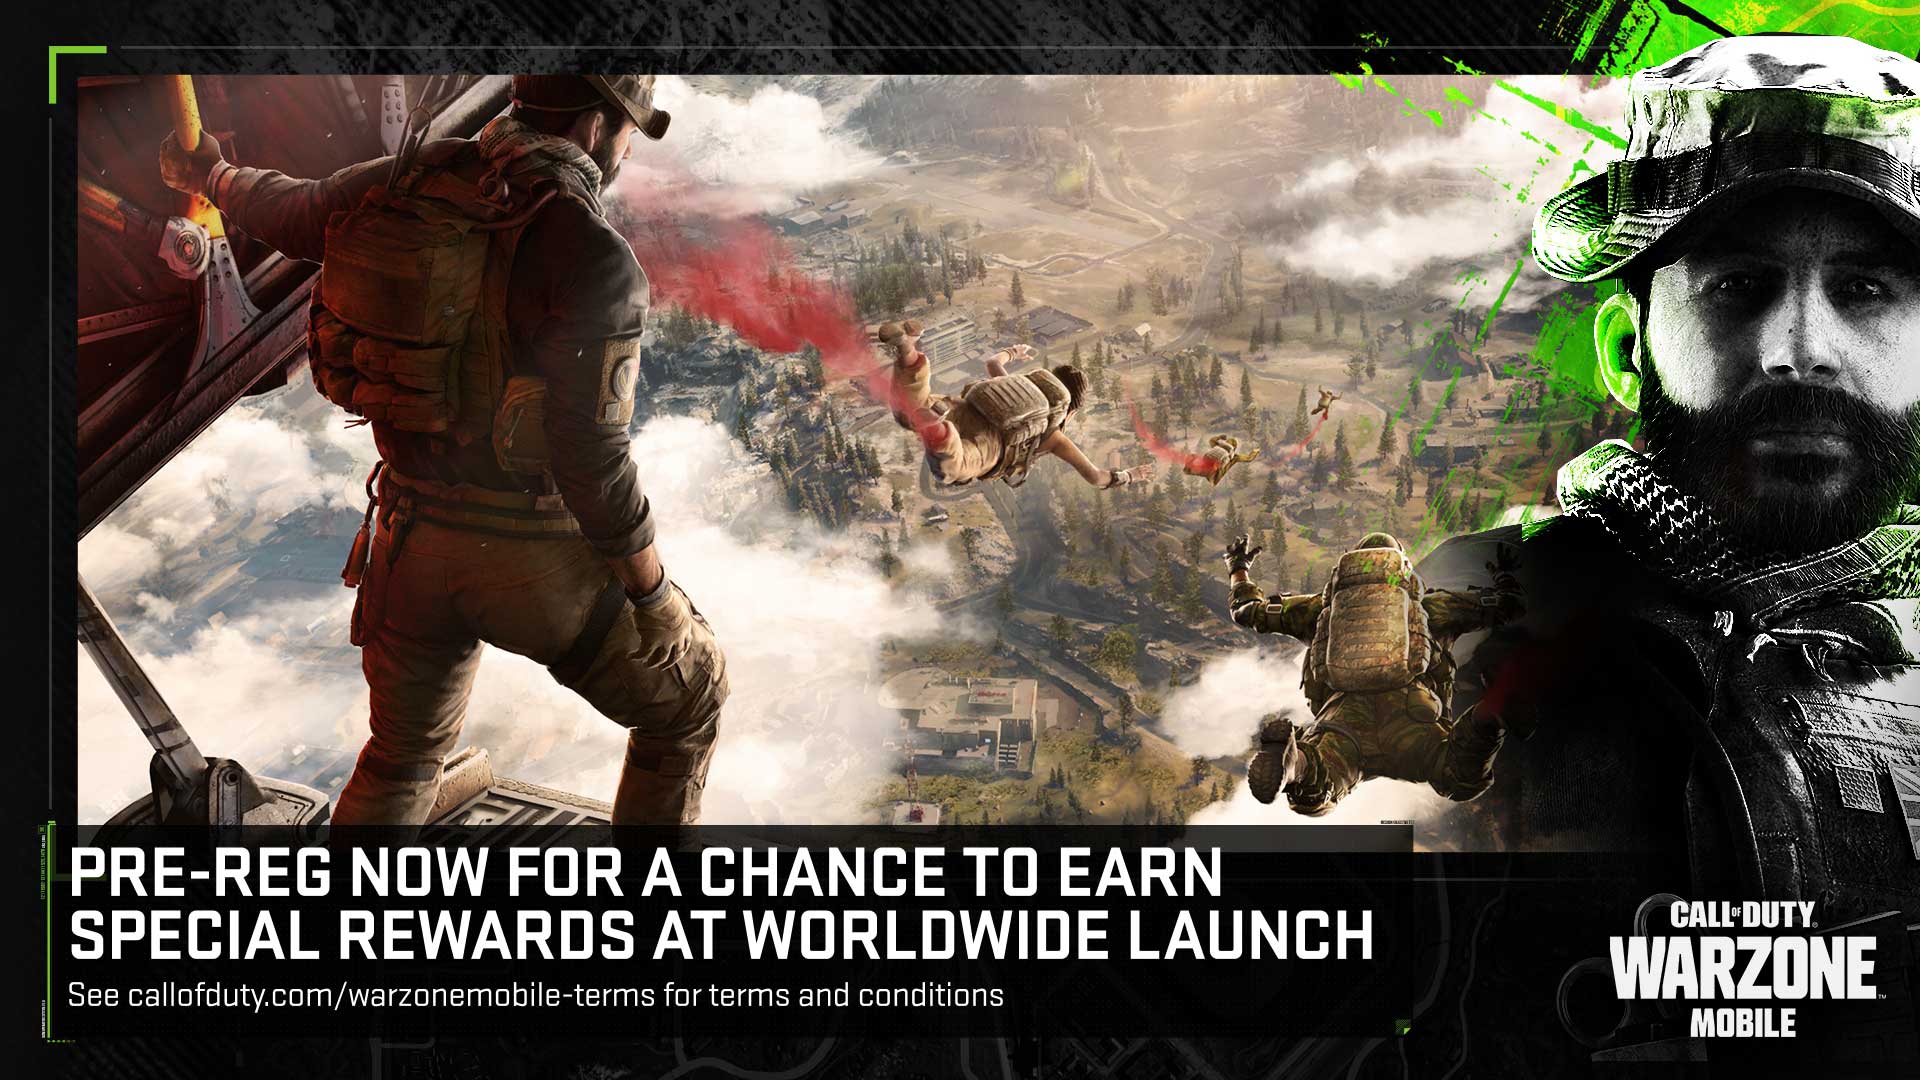 Call of Duty: Warzone Mobile pre-registration opens on Android